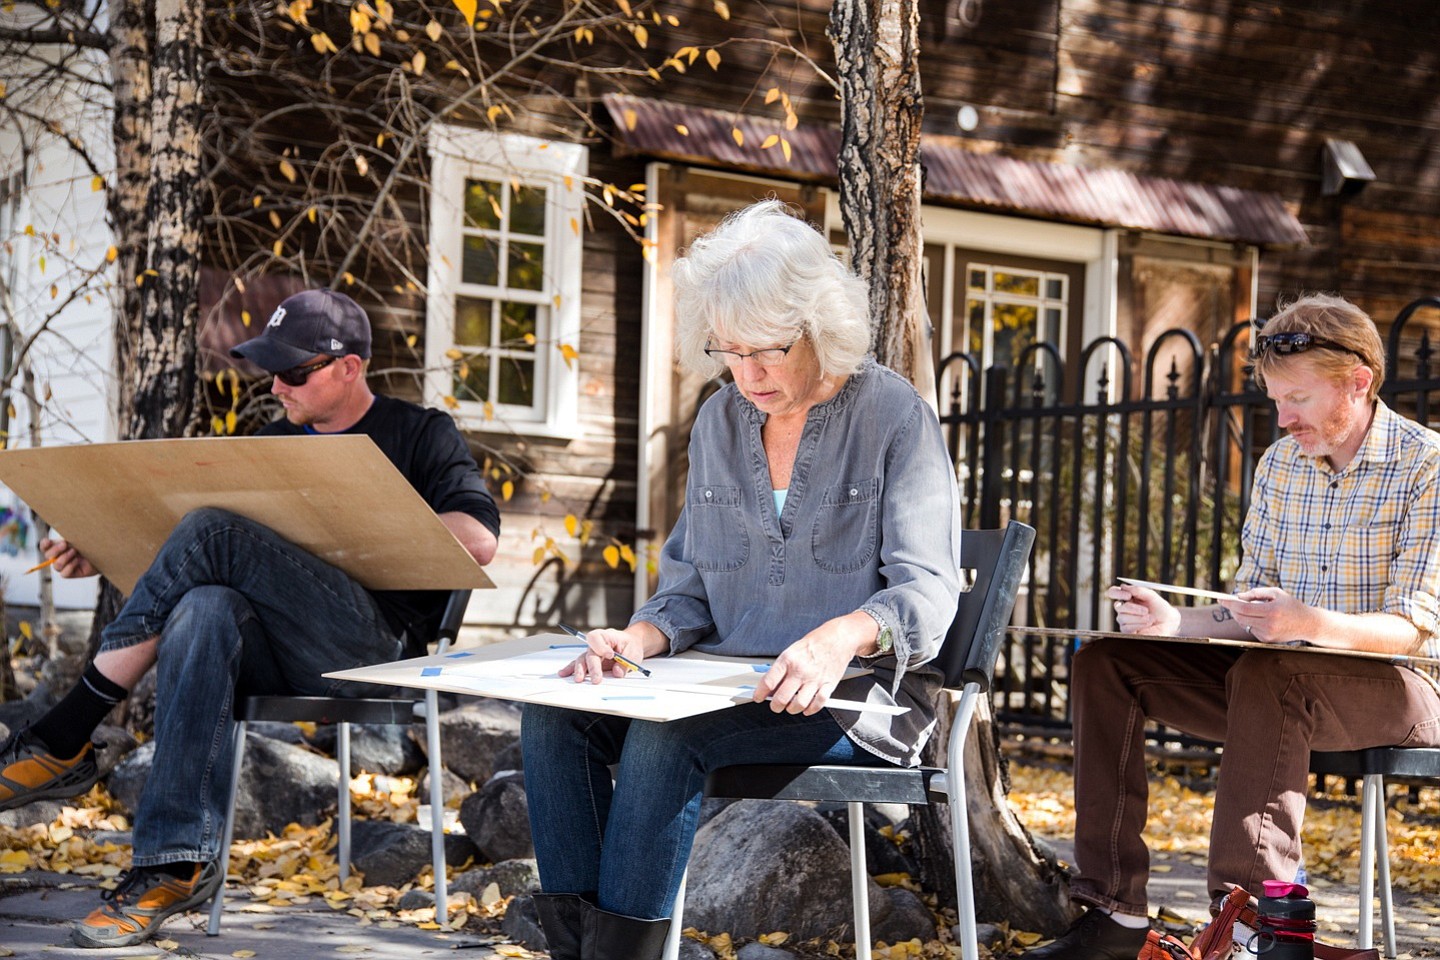 Liam Doran/Breckenridge Creative Arts
Artist Ben Pond, from right, leads students Betsy Williamson and Chris Hosbach in an outdoor drawing workshop at the Breckenridge Arts District in Breckenridge, Colo.